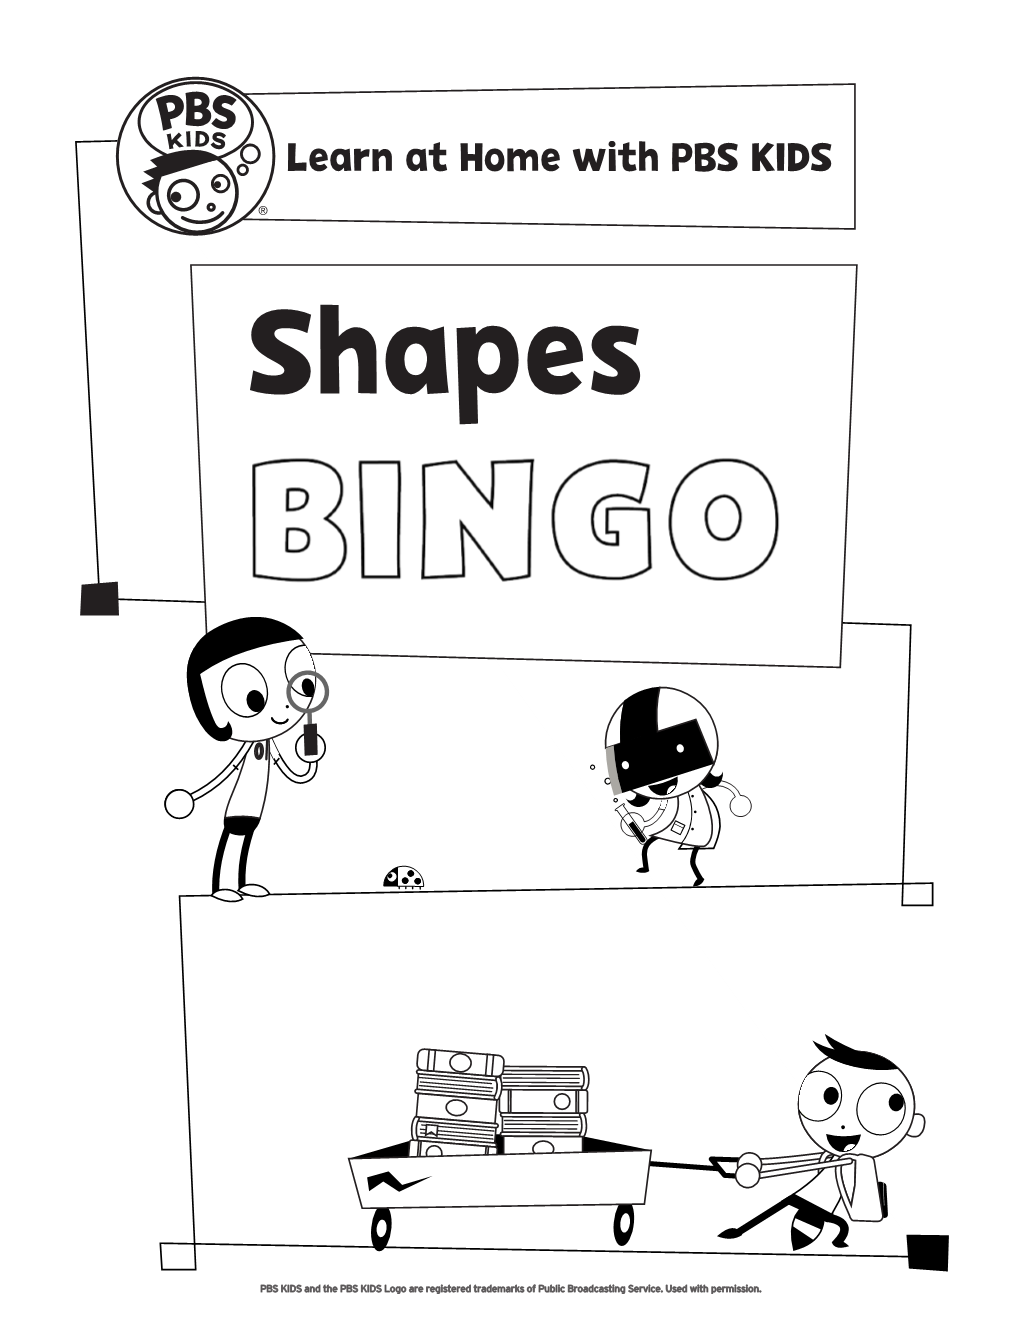 Learn at Home with PBS KIDS